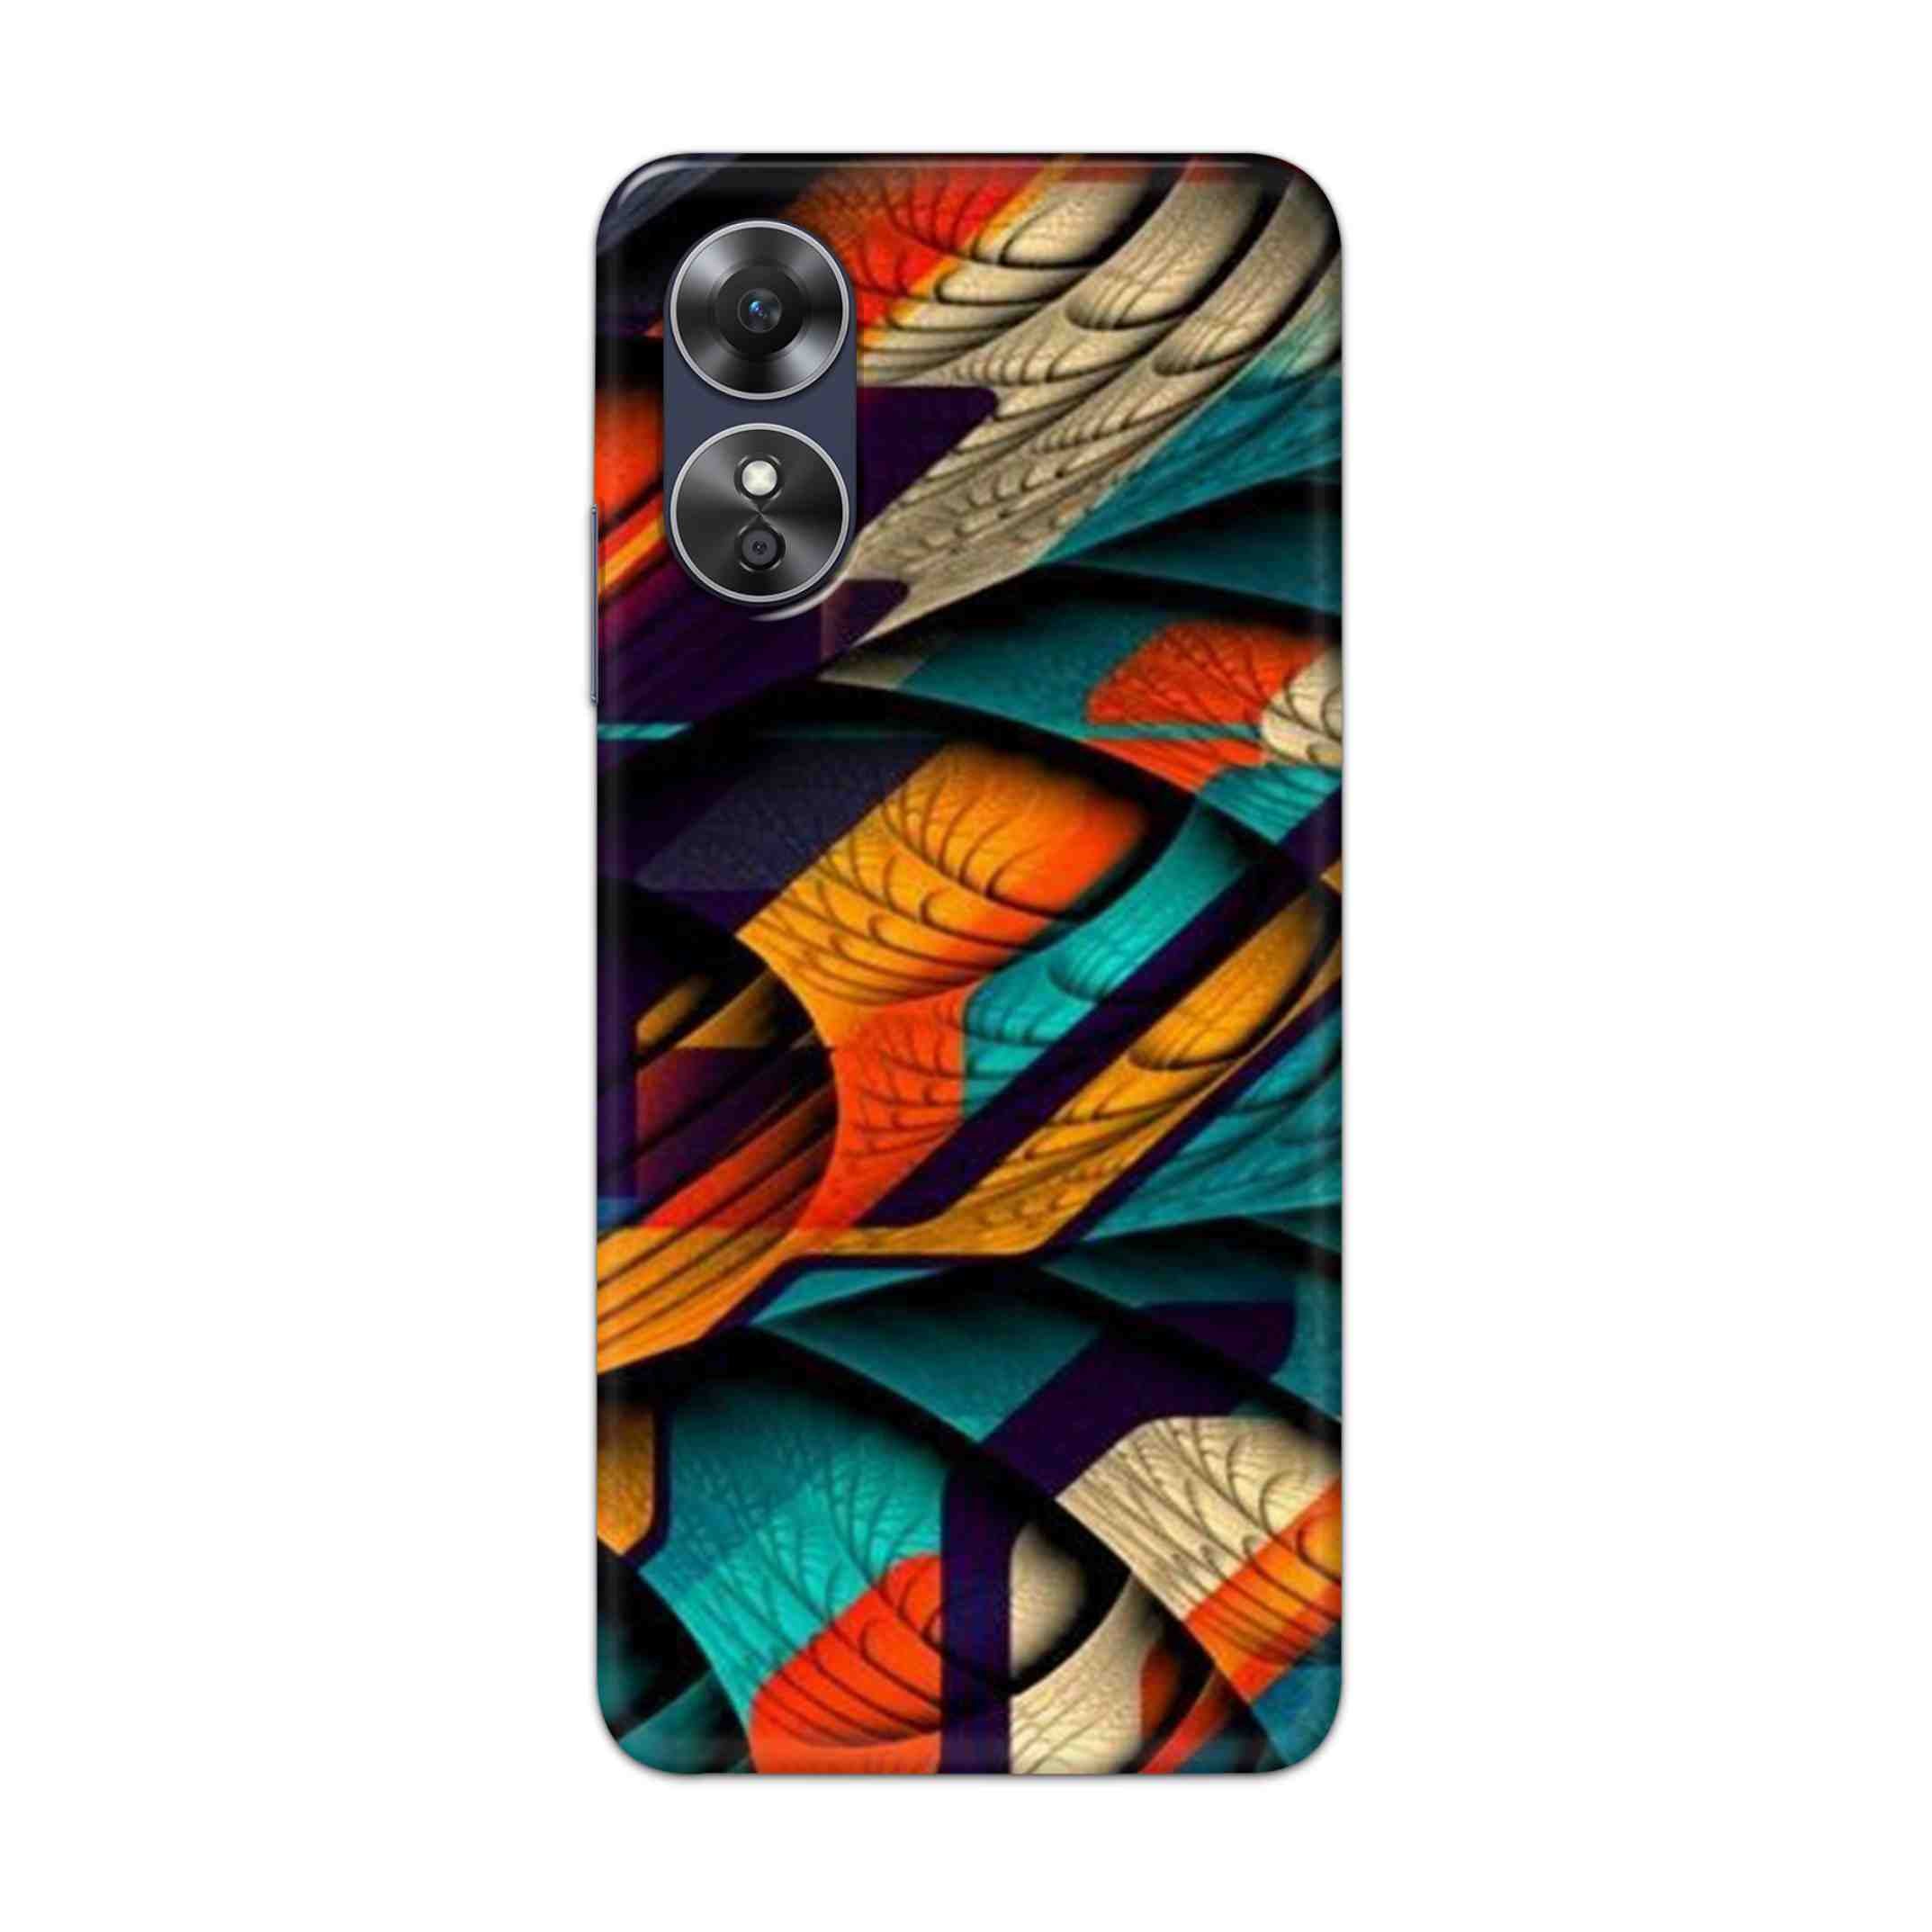 Buy Colour Abstract Hard Back Mobile Phone Case Cover For Oppo A17 Online